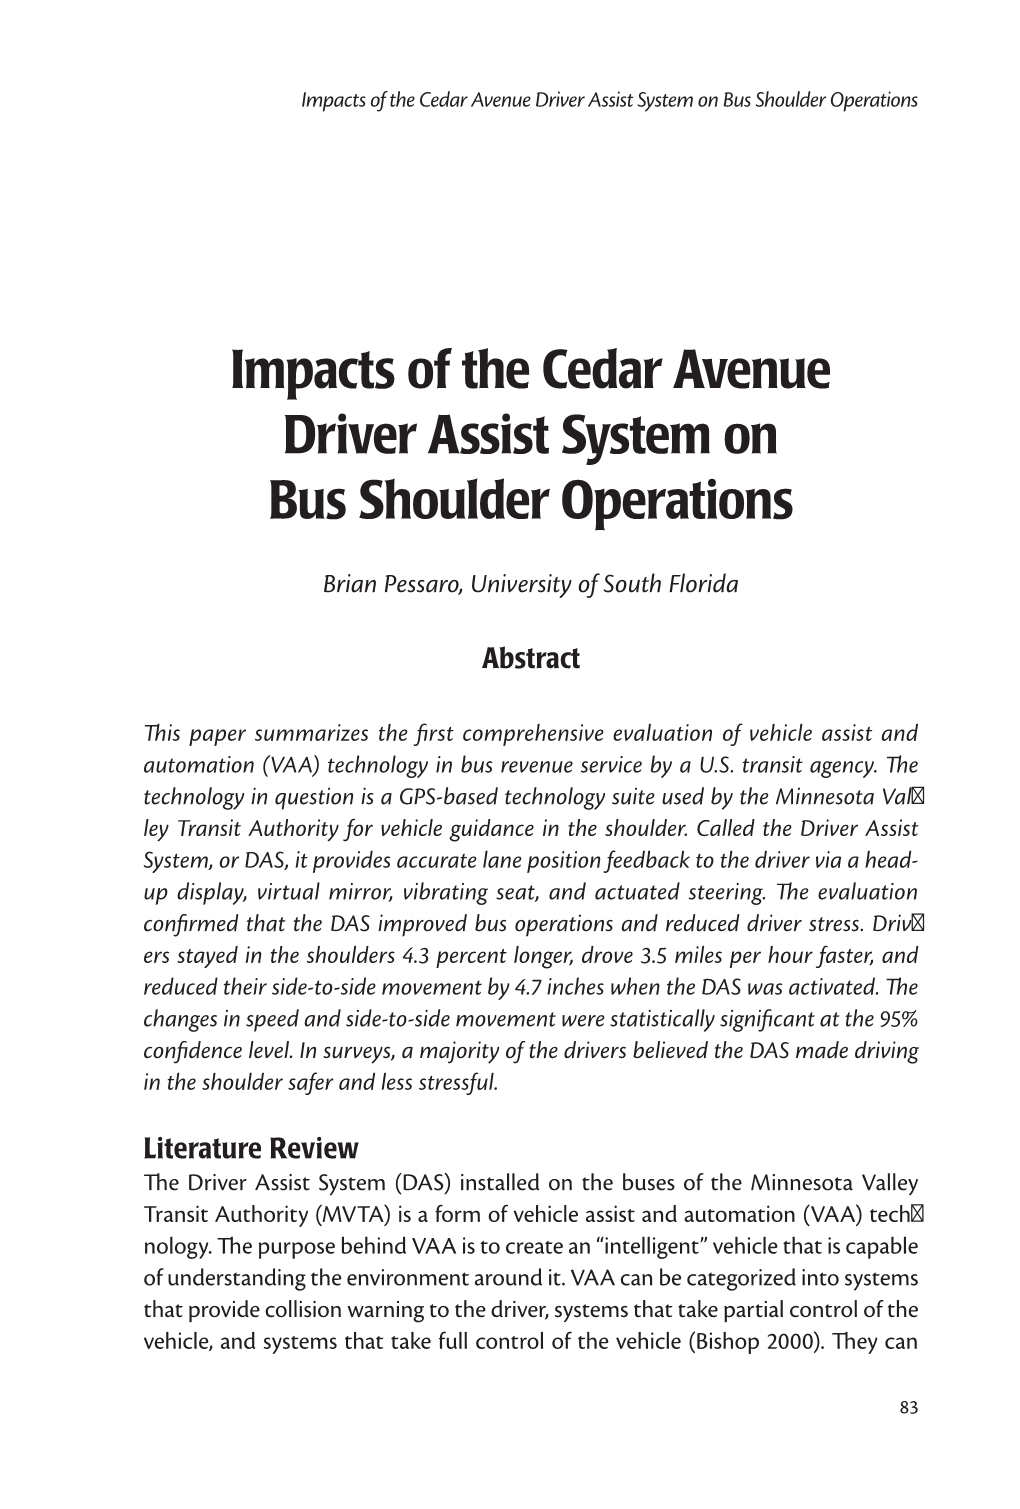 Impacts of the Cedar Avenue Driver Assist System on Bus Shoulder Operations